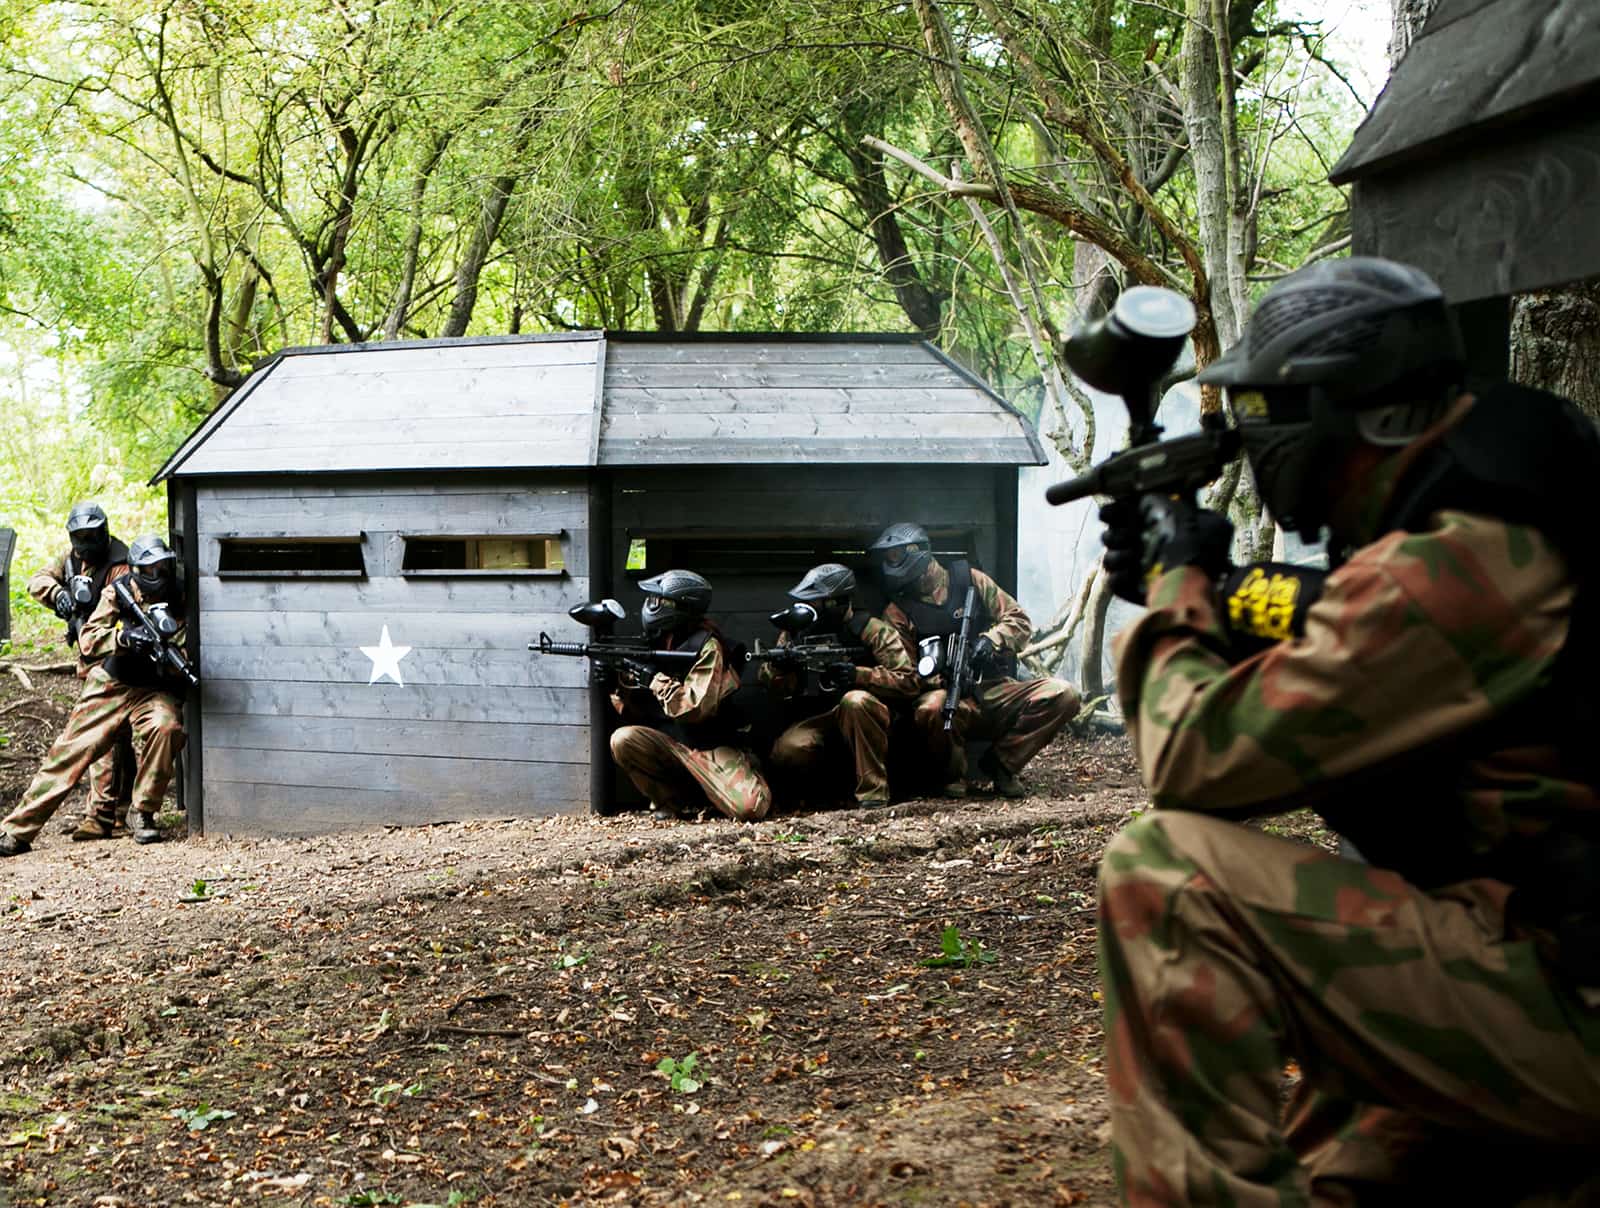 Players surround enemy bunker